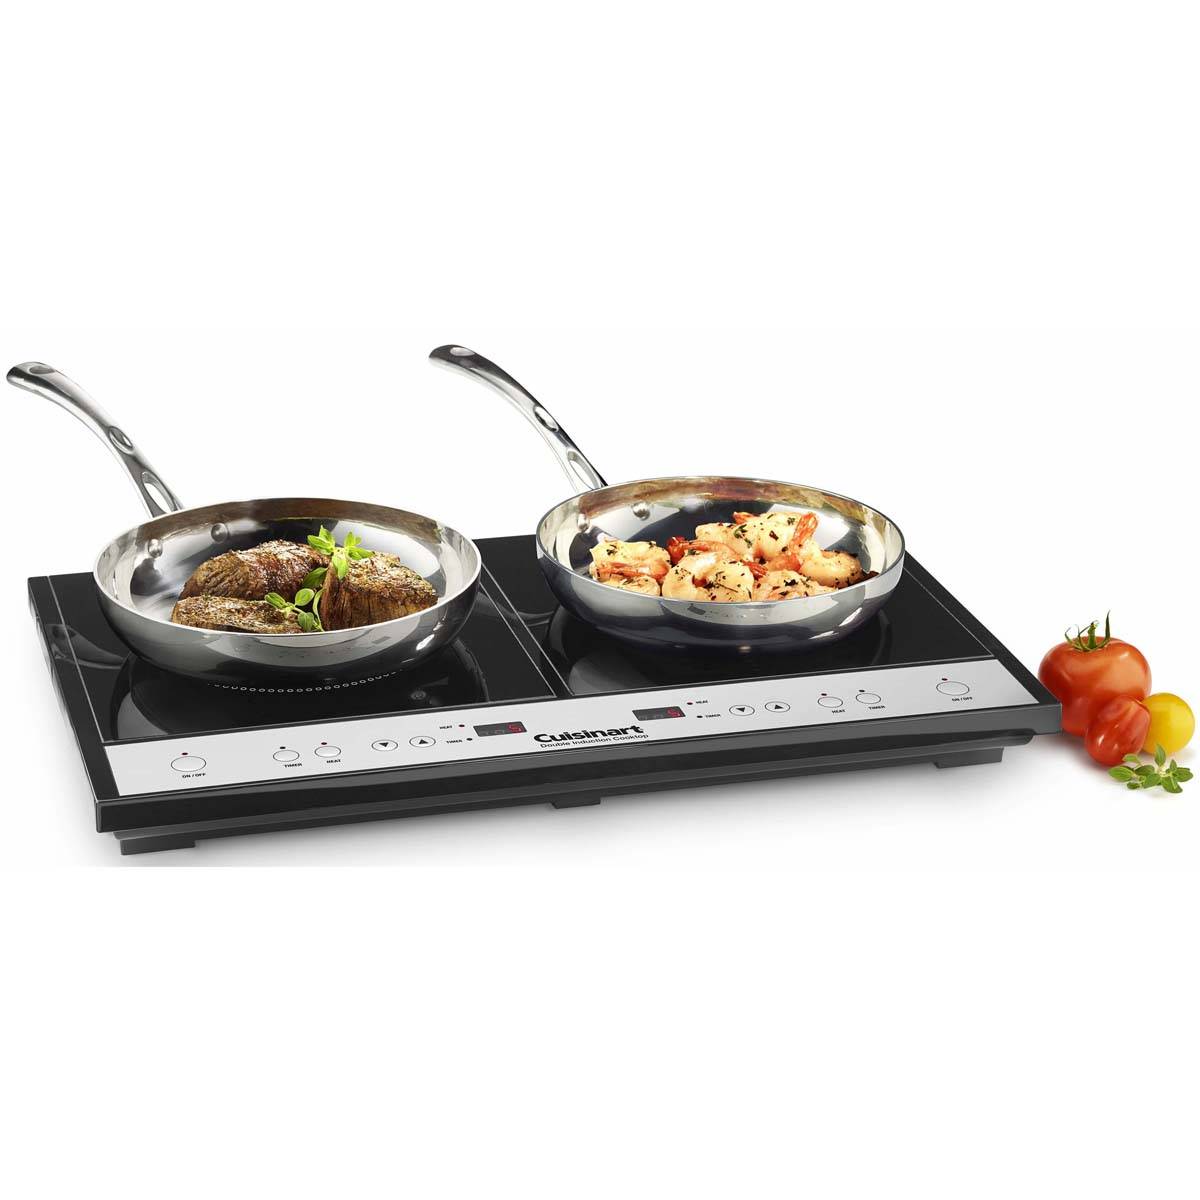 Cuisinart(R) Double Induction Cooktop